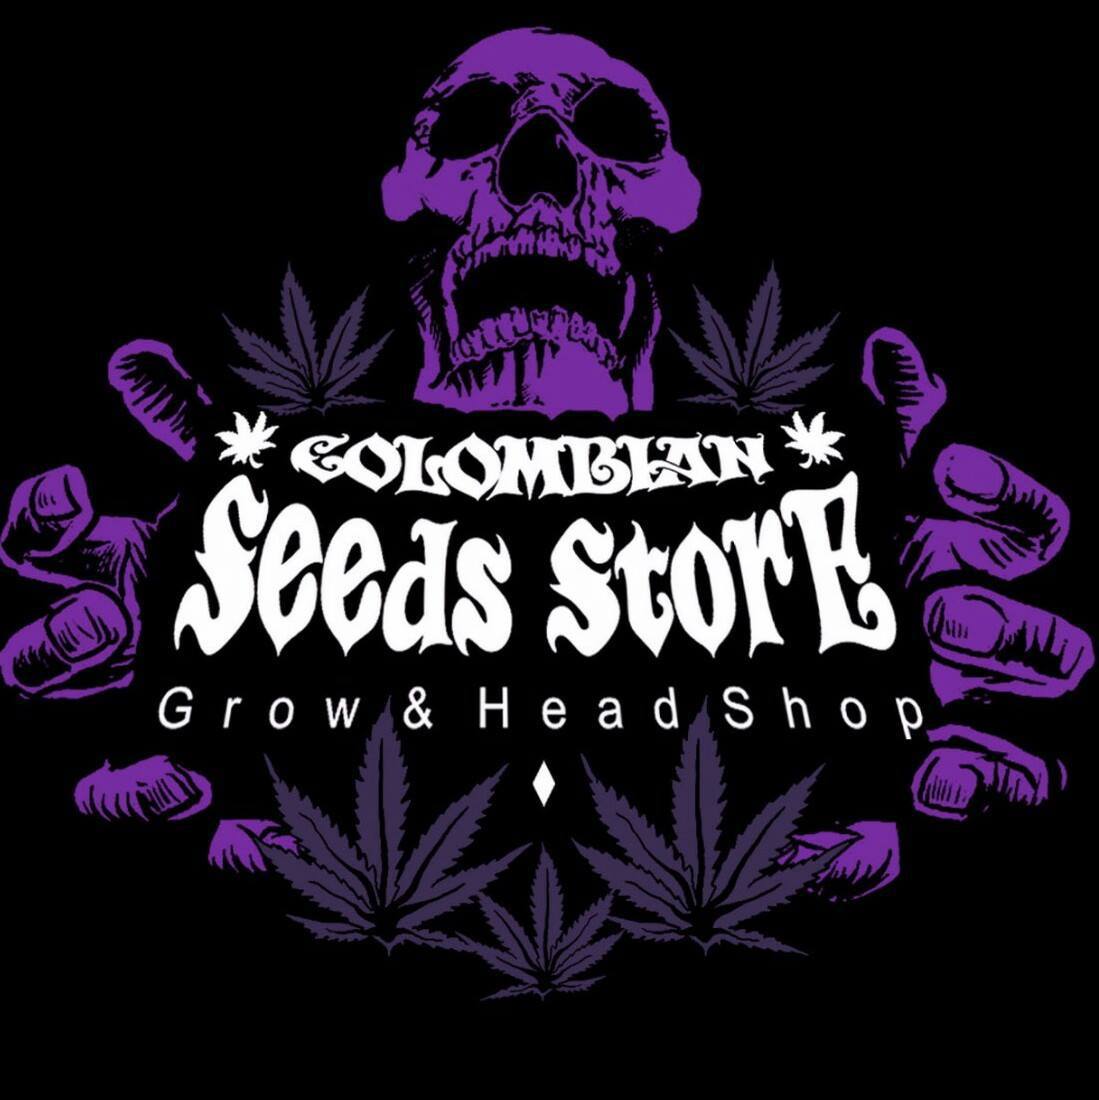 Colombiam seeds store growshop